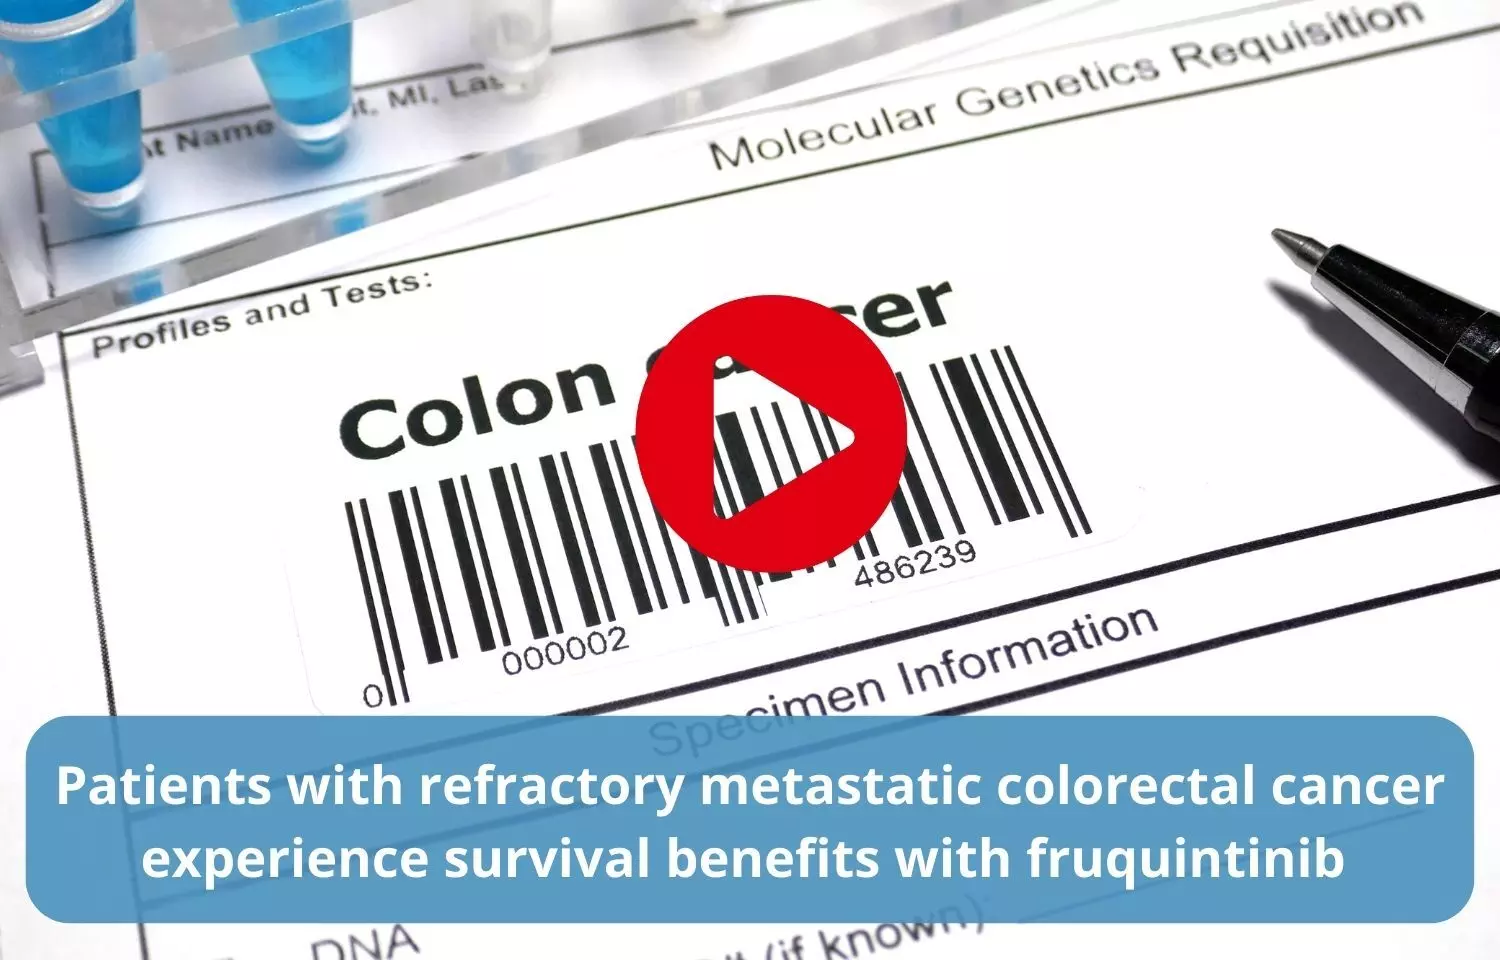 Patients with refractory metastatic colorectal cancer experience survival benefits with fruquintinib